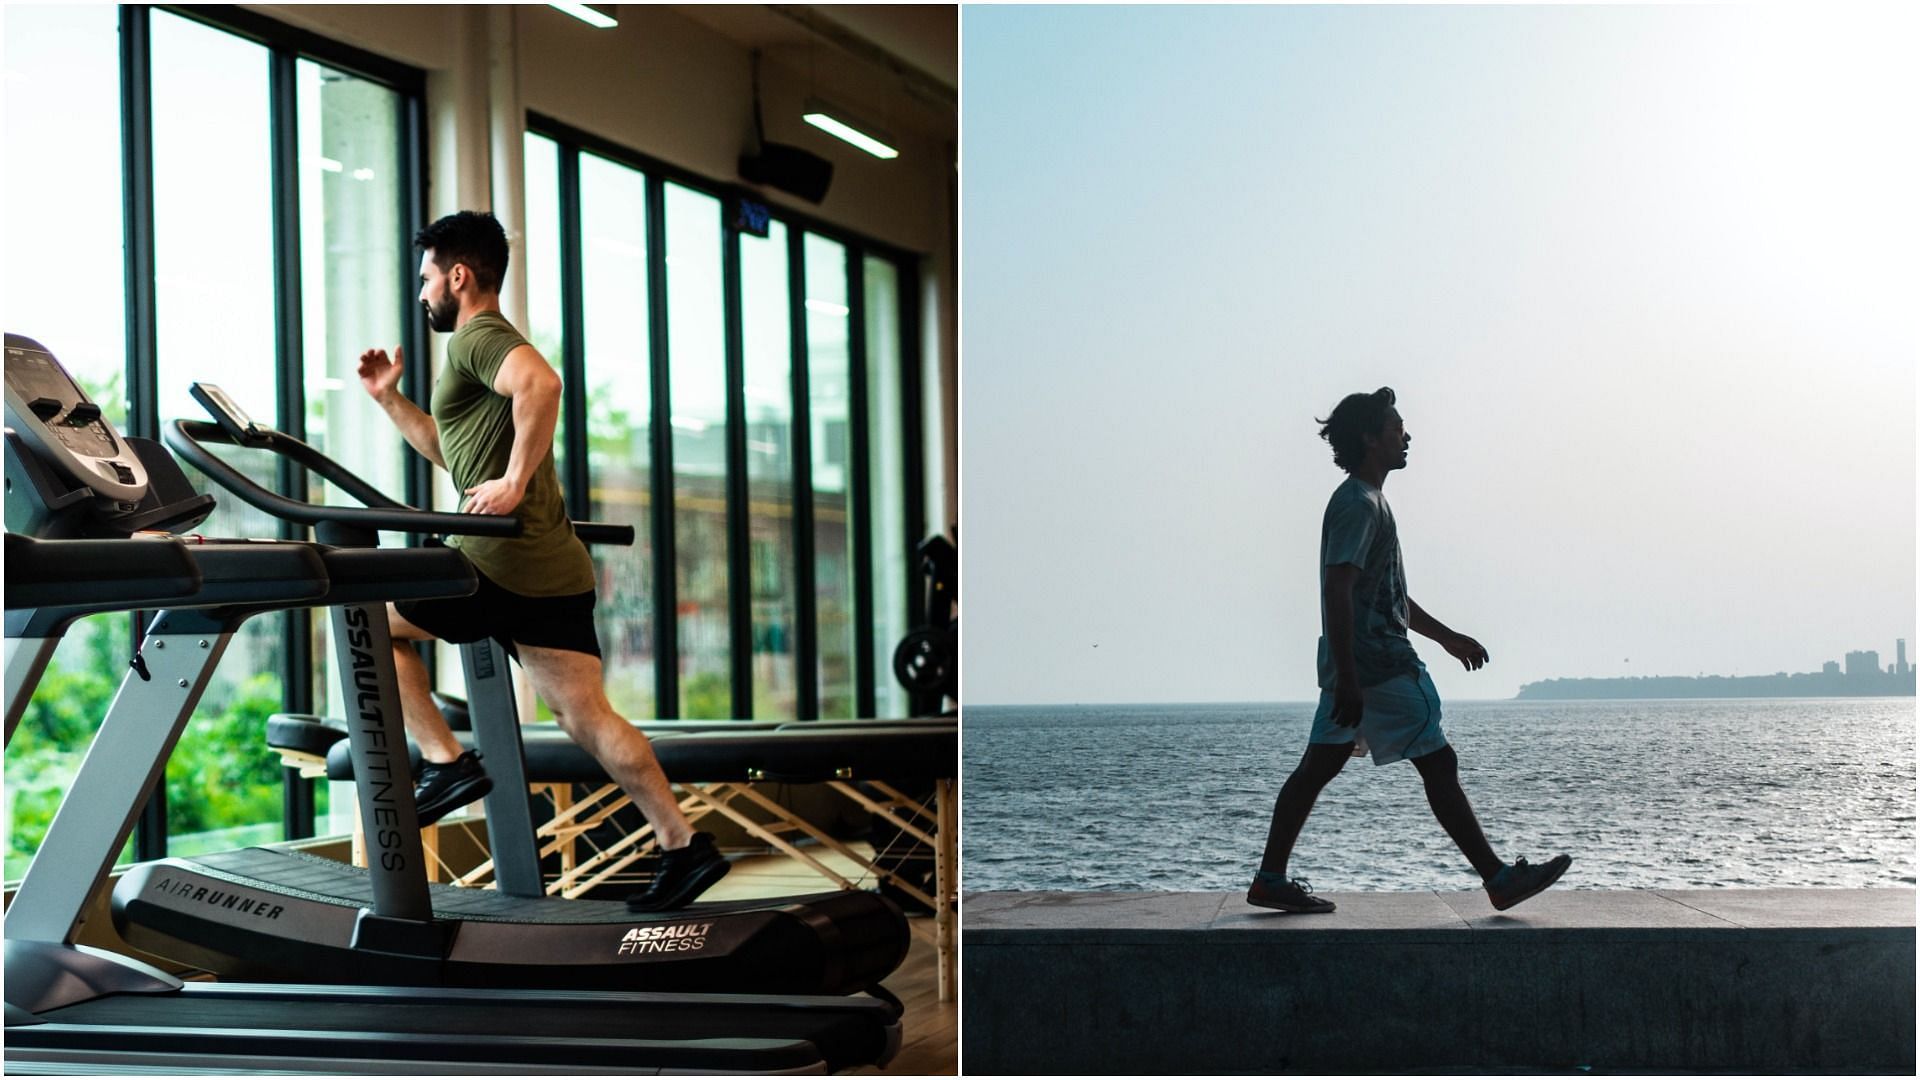 Treadmill Vs Walking Outside. (Image by William Choquette (left), Yogendra Singh (right) / Pexels)